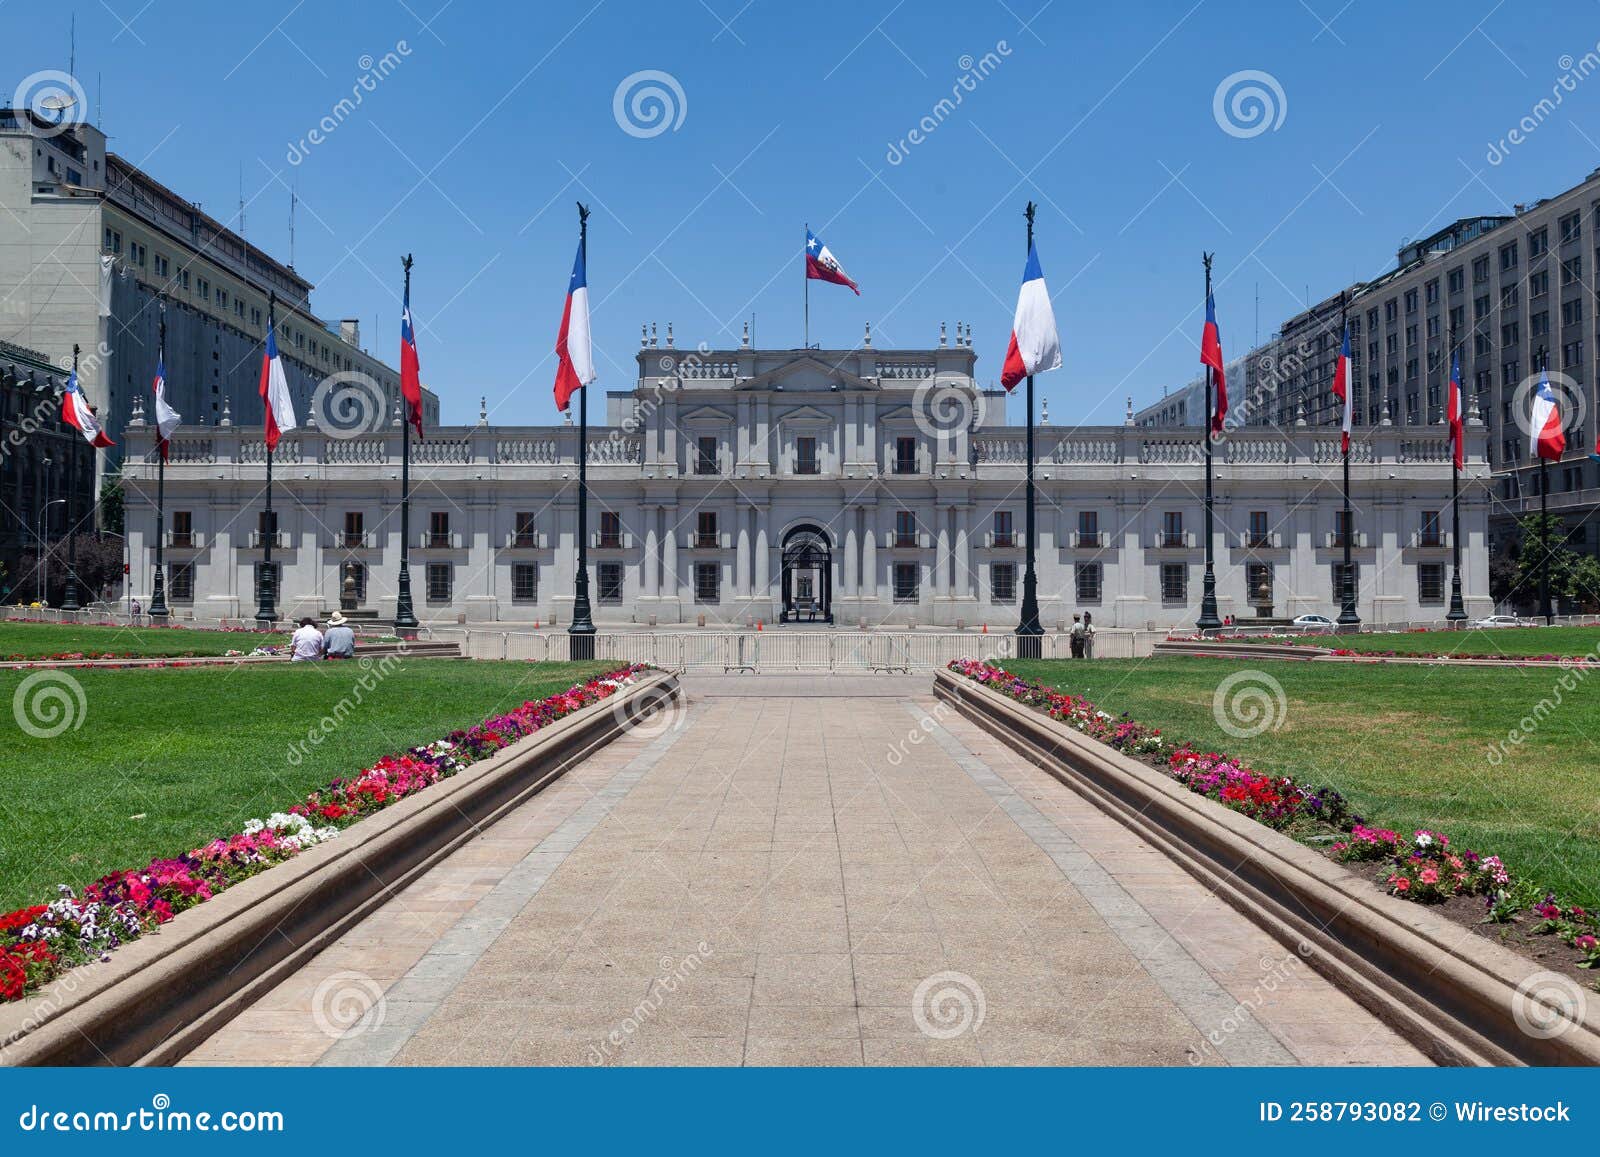 outdoor view of the la moneda palace in santiago, chile